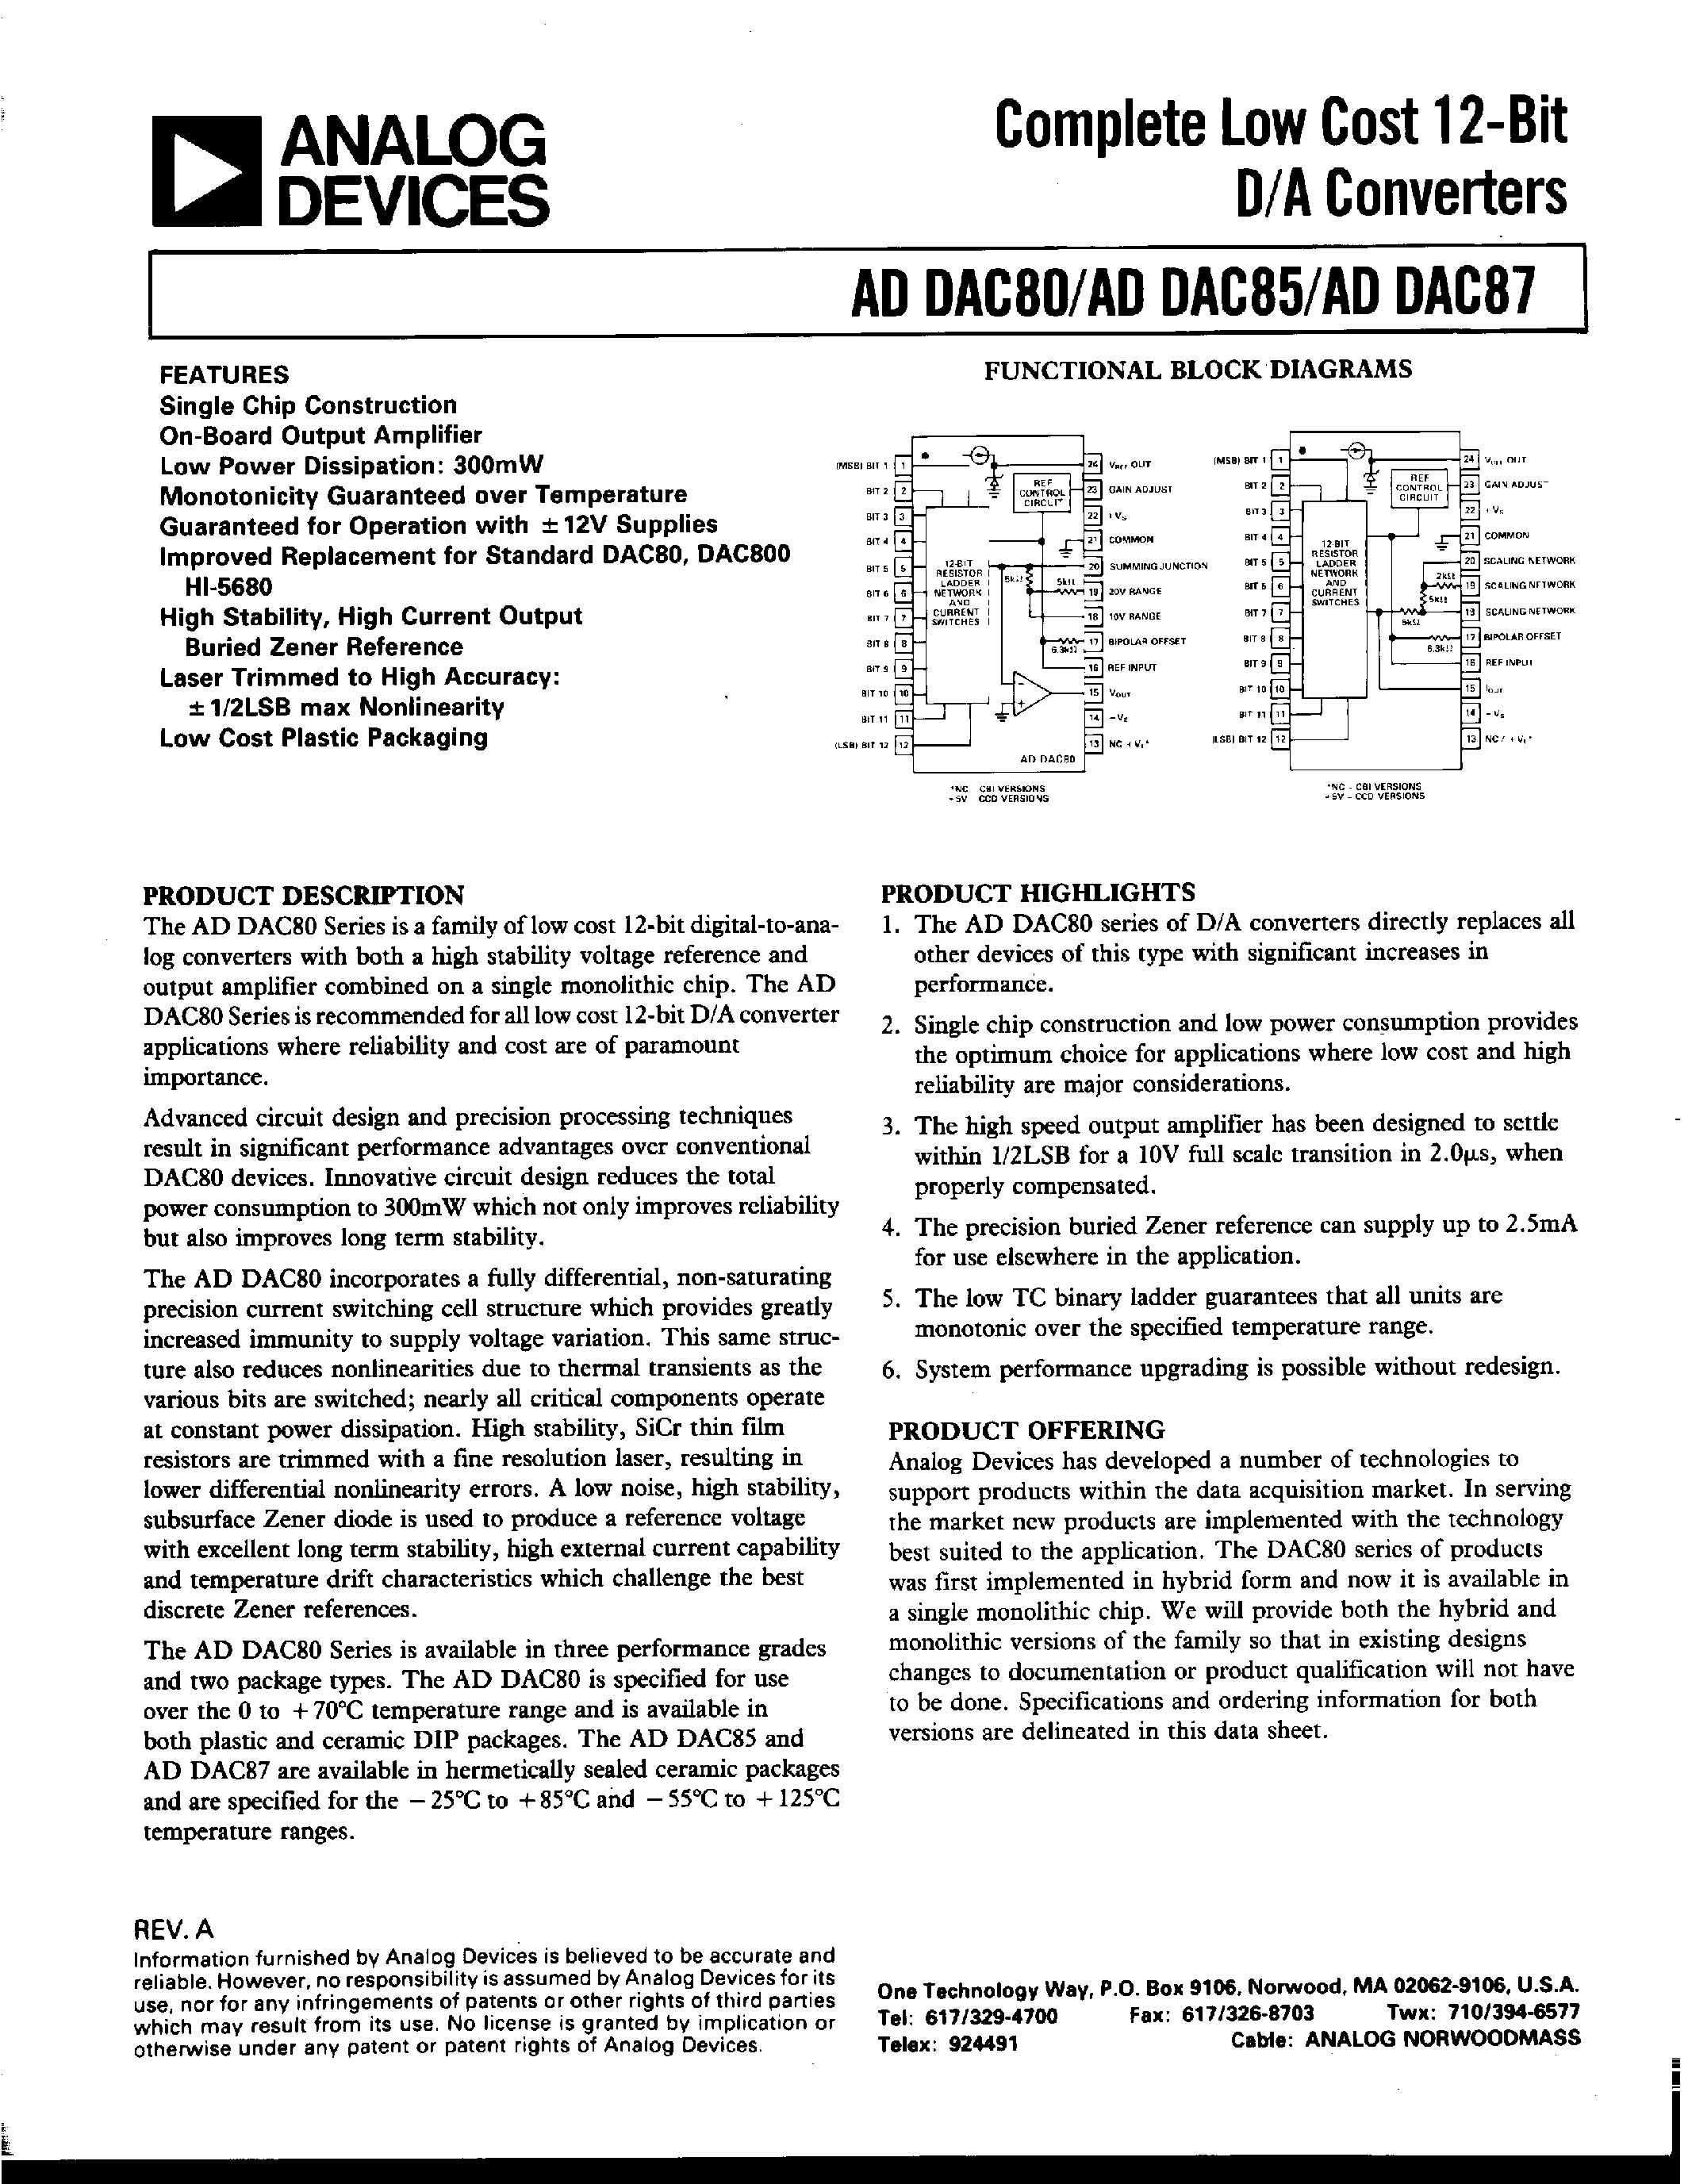 Datasheet ADDAC85MIL-CBI-I - COMPLETE LOW COST 12-BIT D/A CONVERTERS page 1